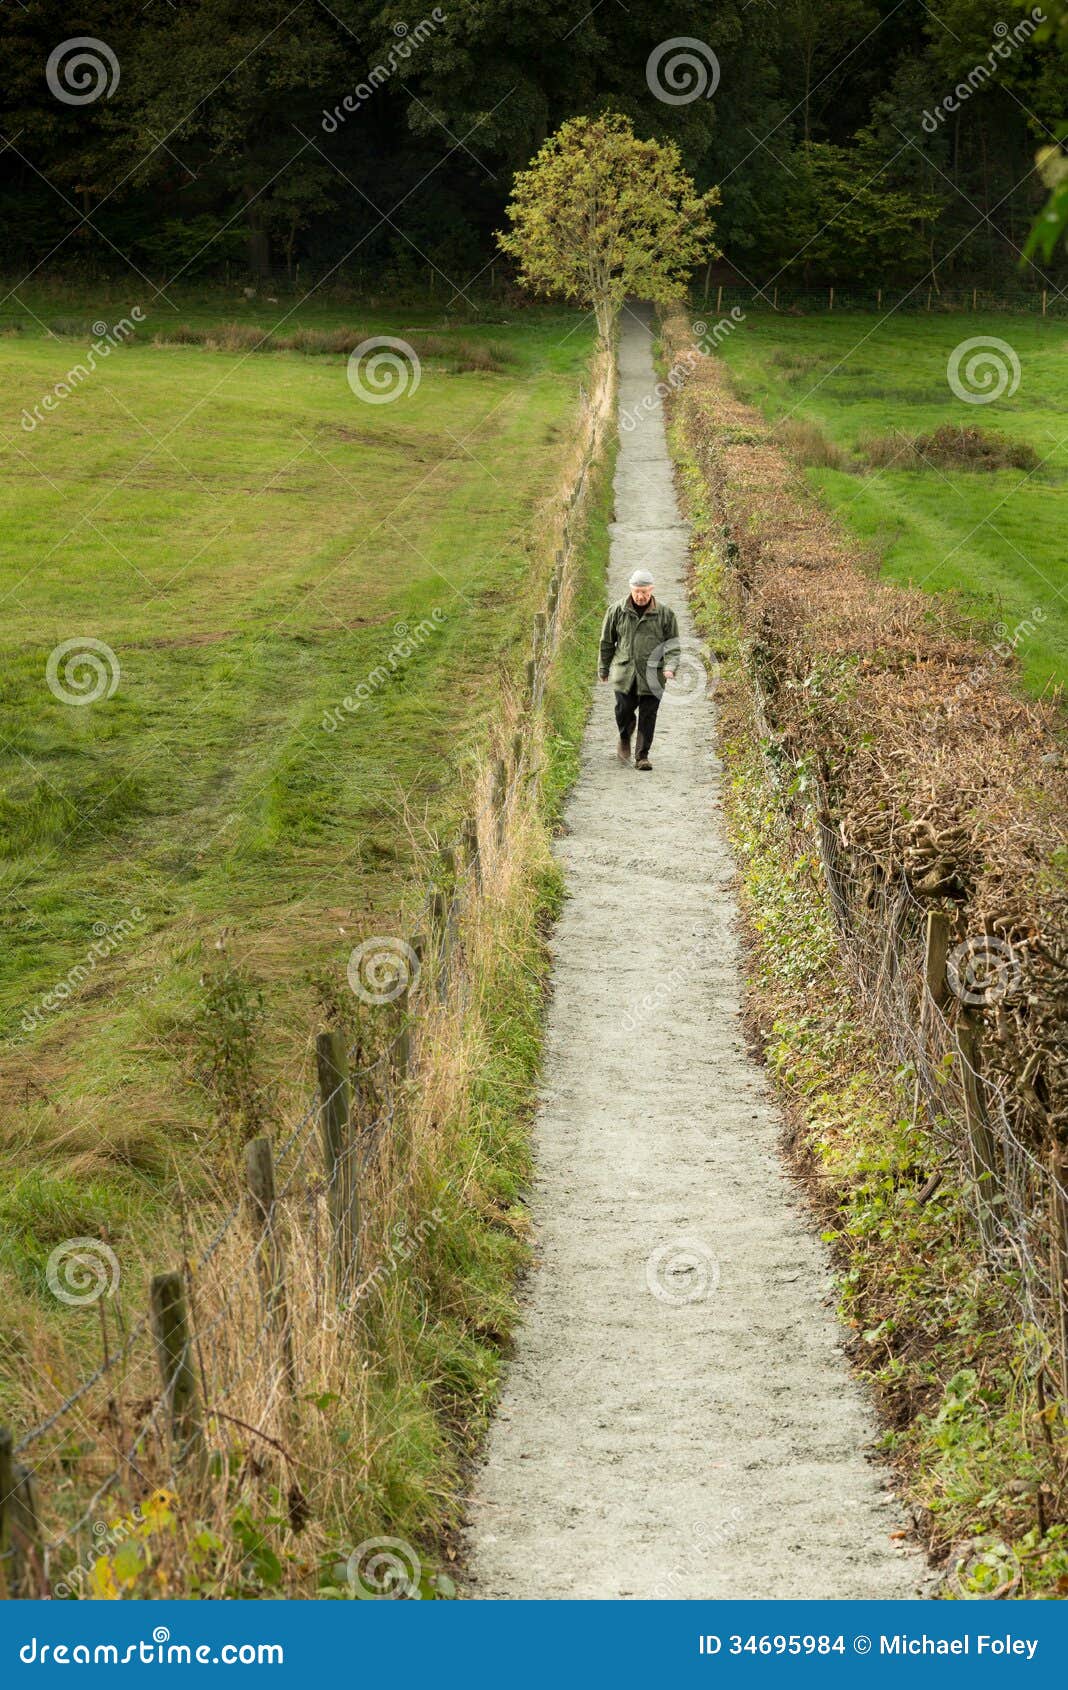 Straight, Narrow Path Stock Images - Image: 34695984